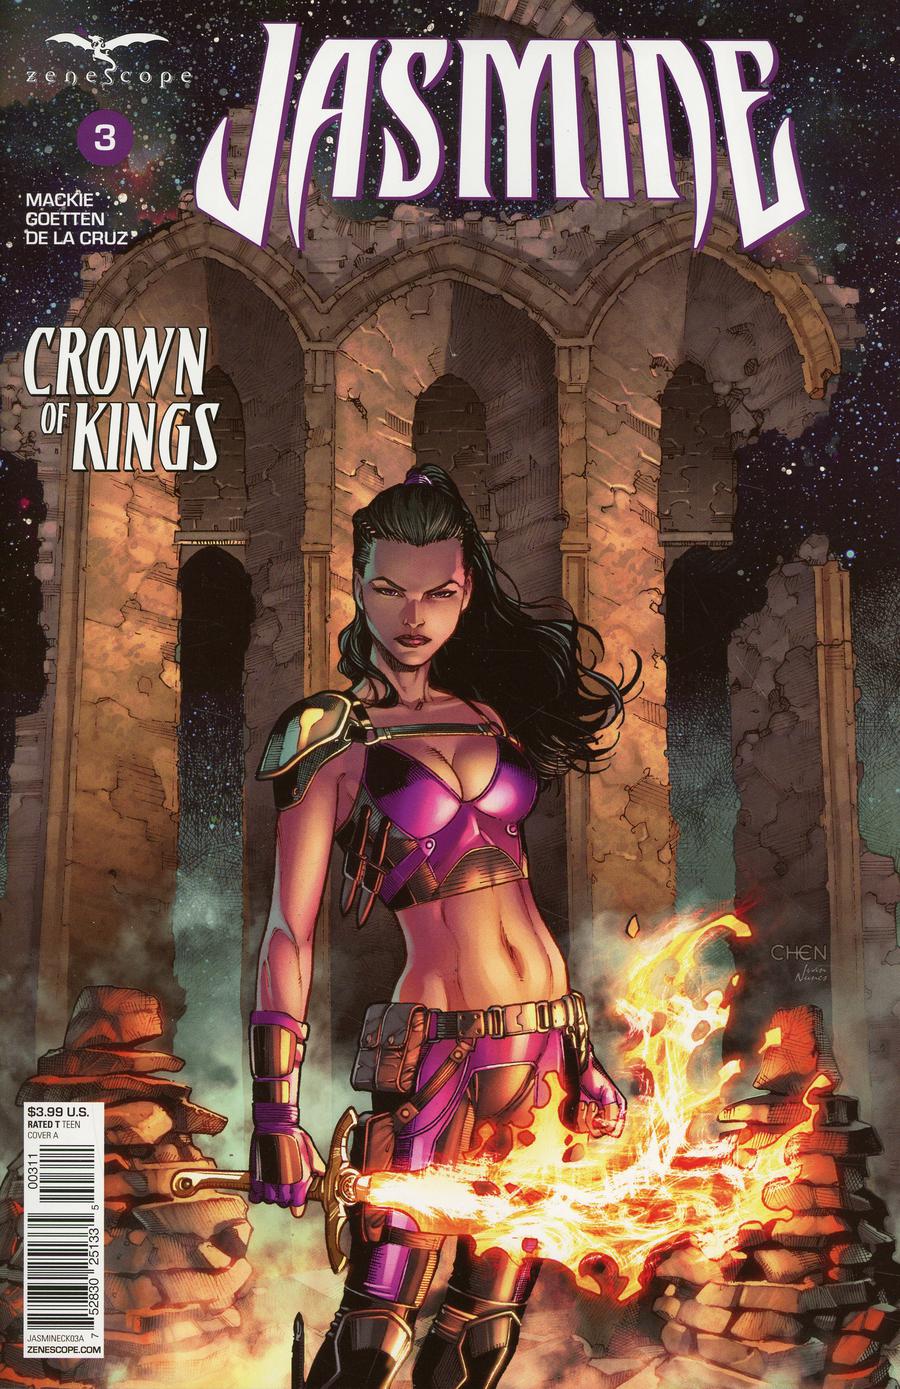 Grimm Fairy Tales Presents Jasmine Crown Of Kings #3 Cover A Sean Chen